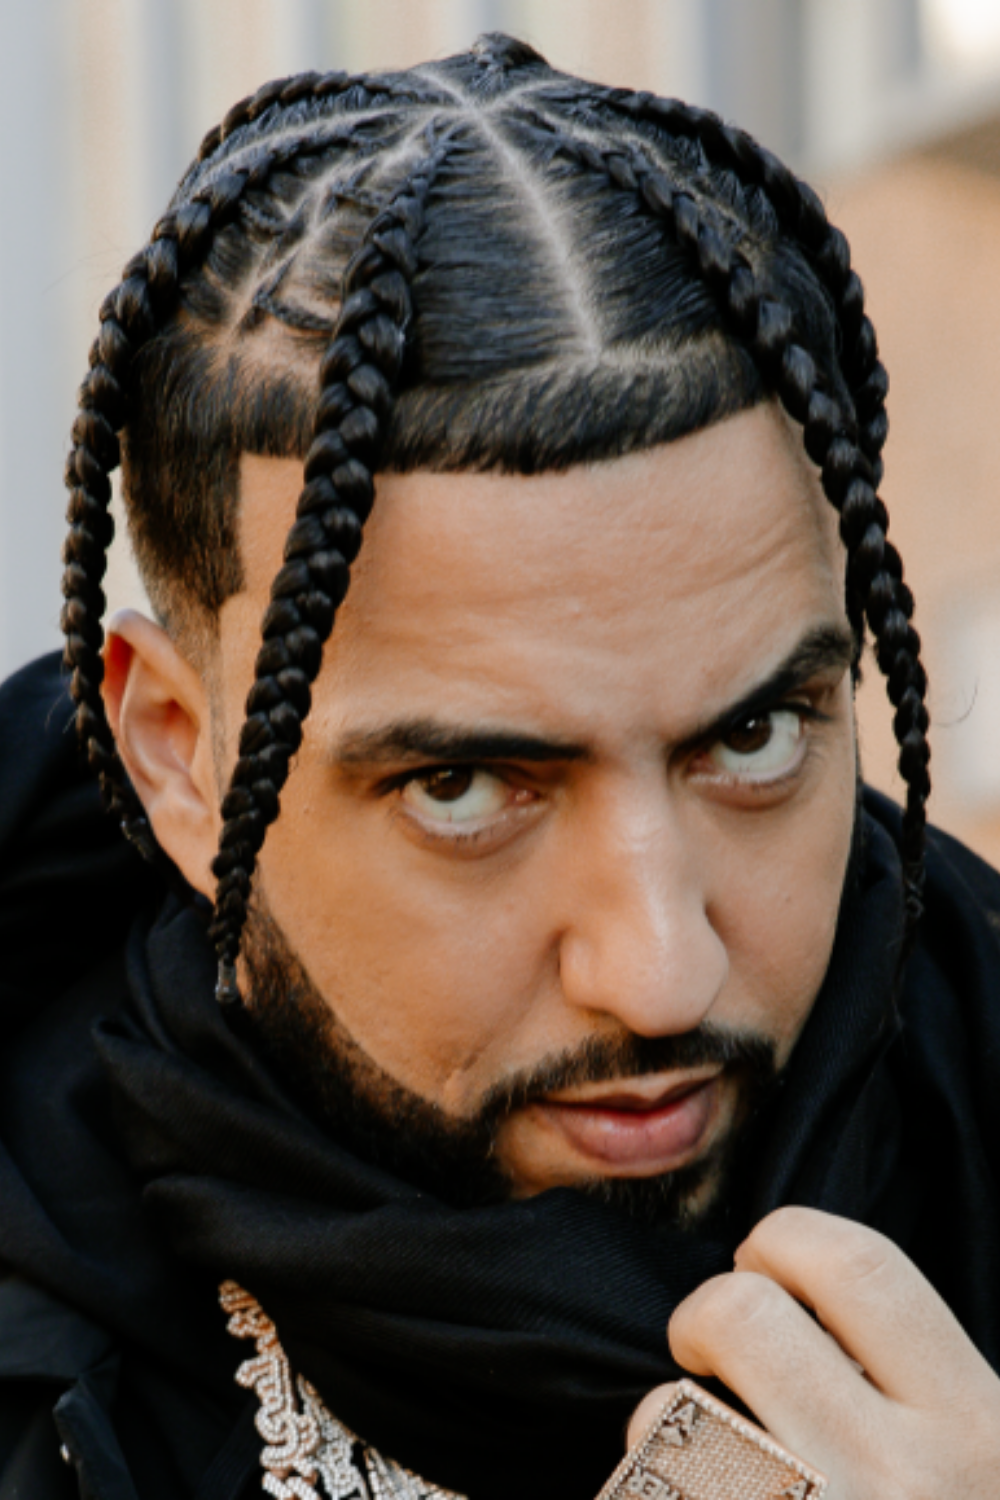 the best French Montana Braids